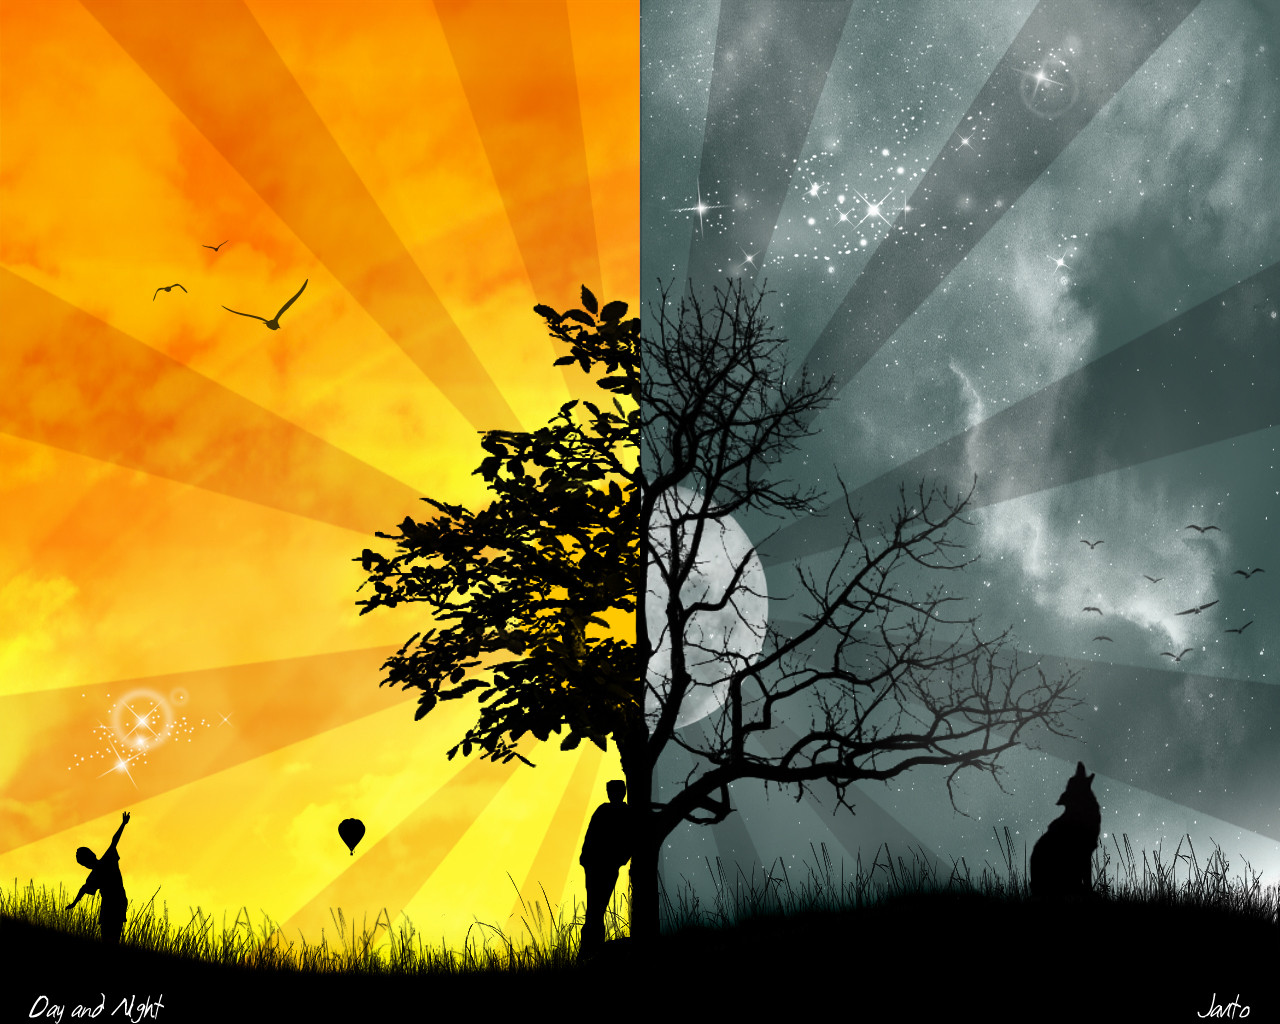 Day And Night - Gods Creation Day And Night - HD Wallpaper 